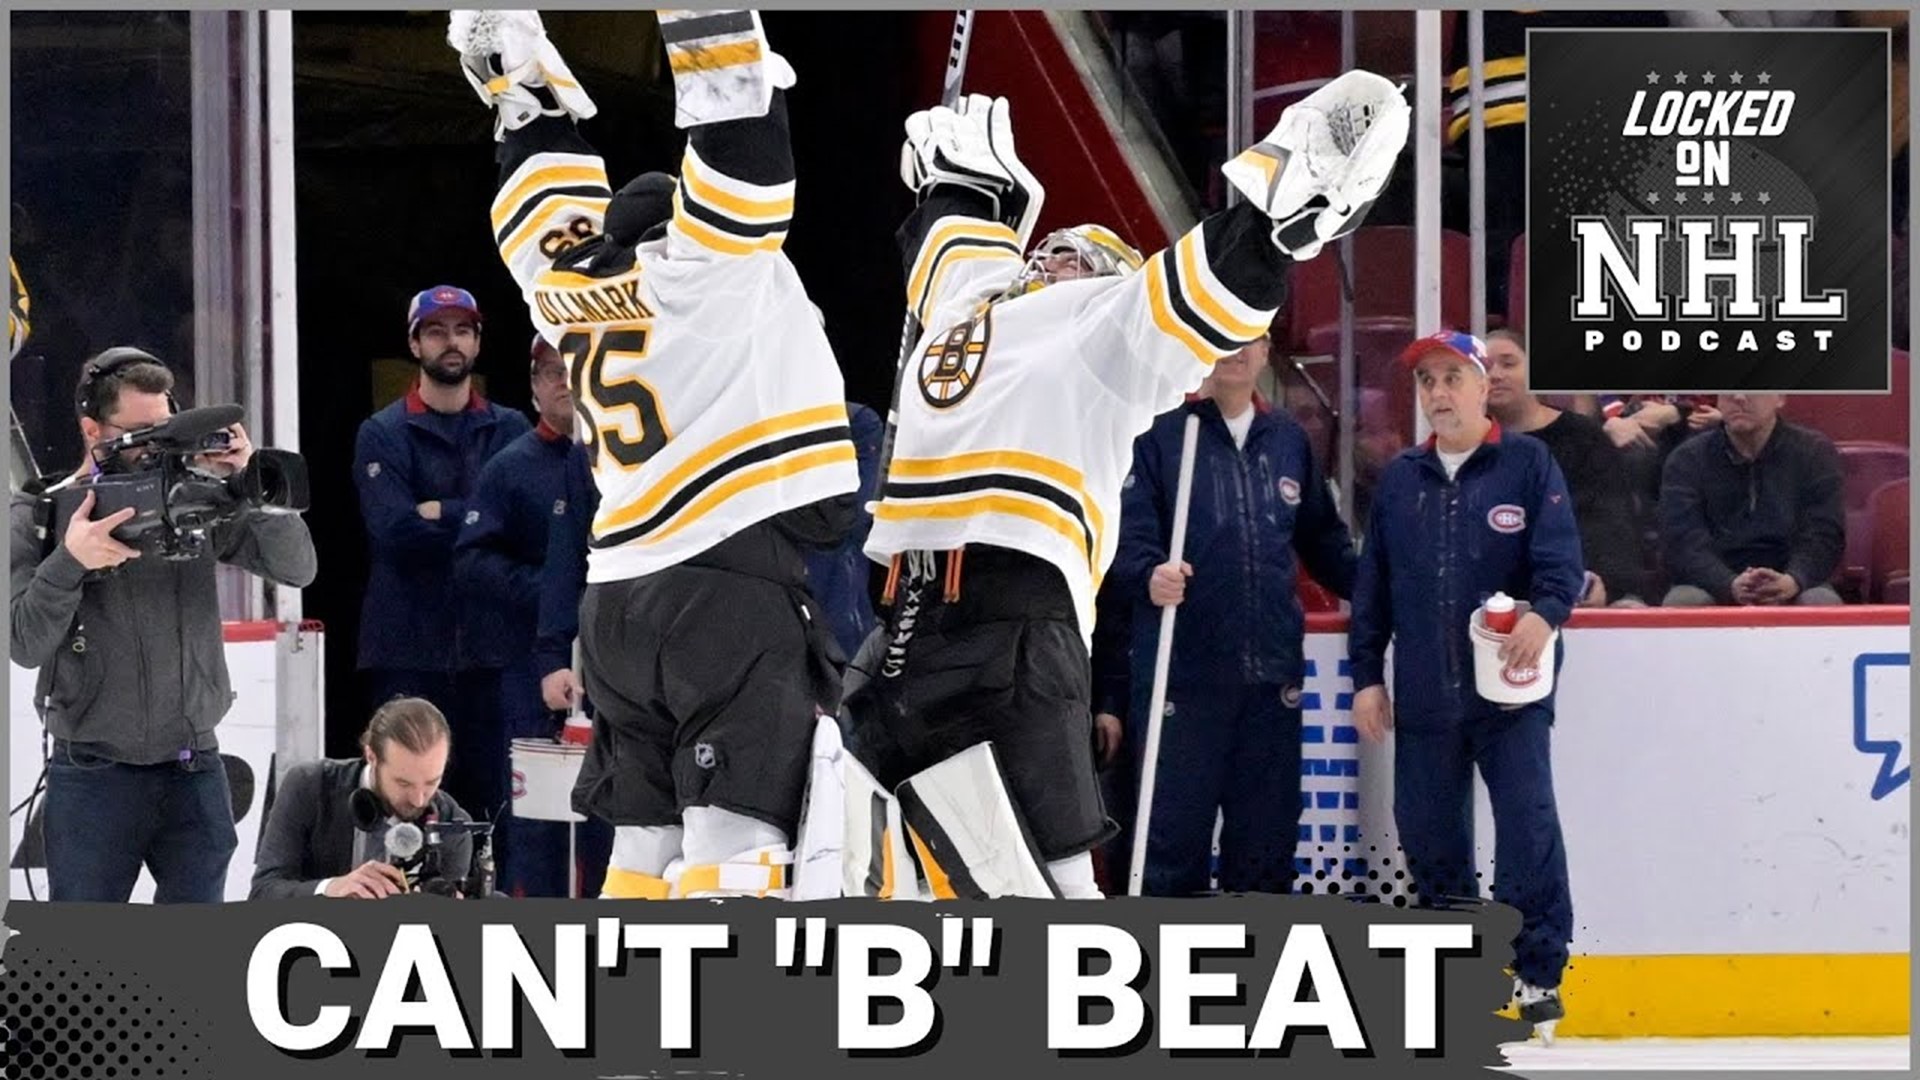 Bruins rolling, rest of NHL making final push for playoffs